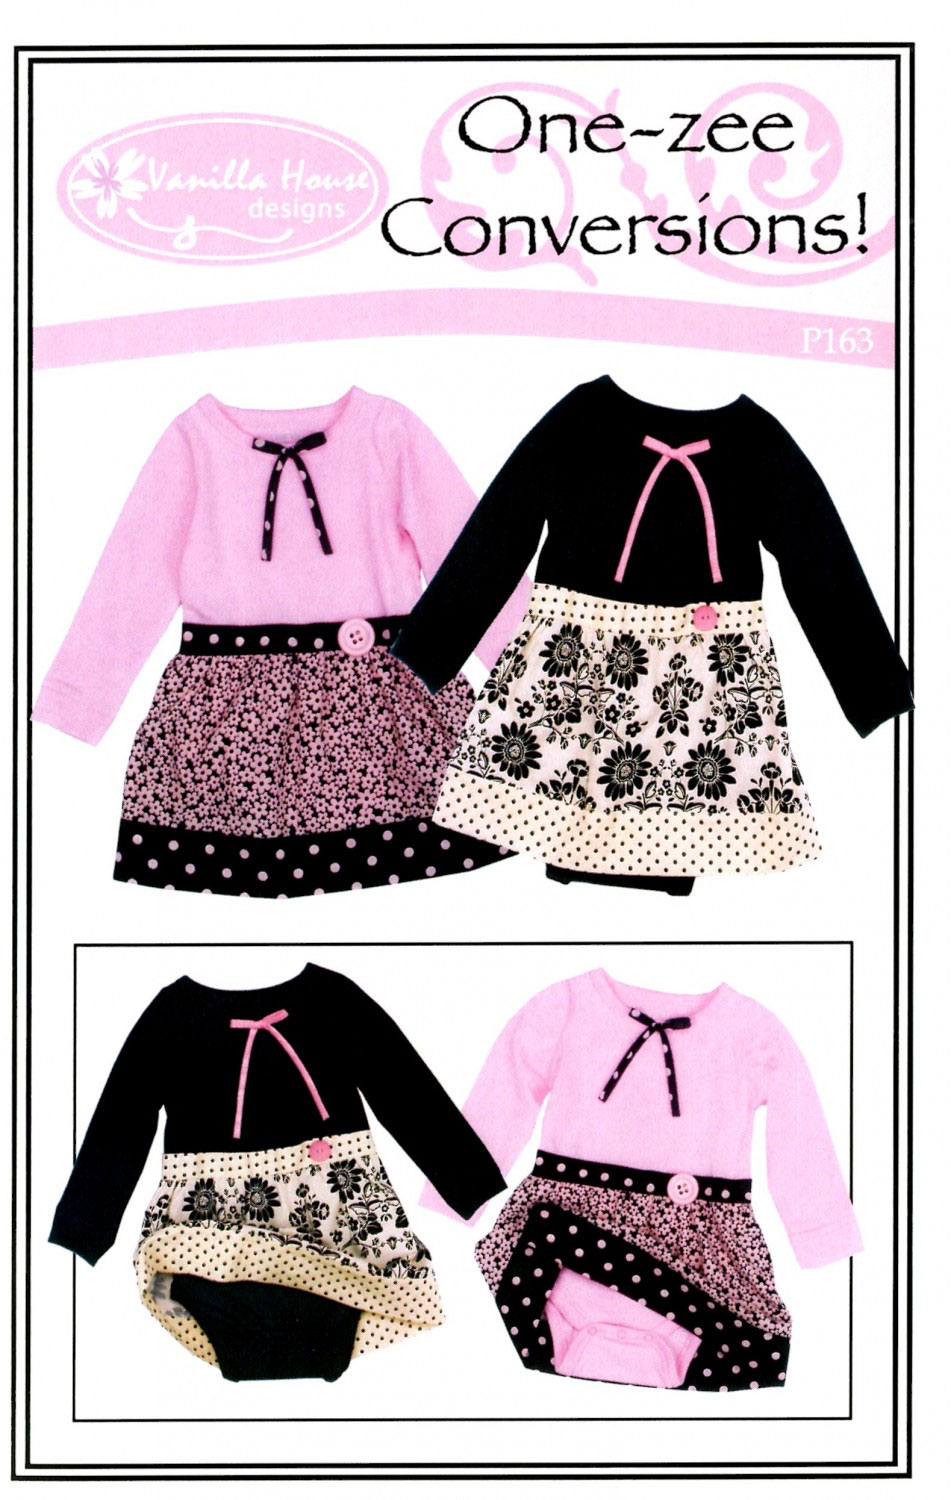 One-Zee-Conversions-sewing-pattern-Vanilla-House-Designs-front